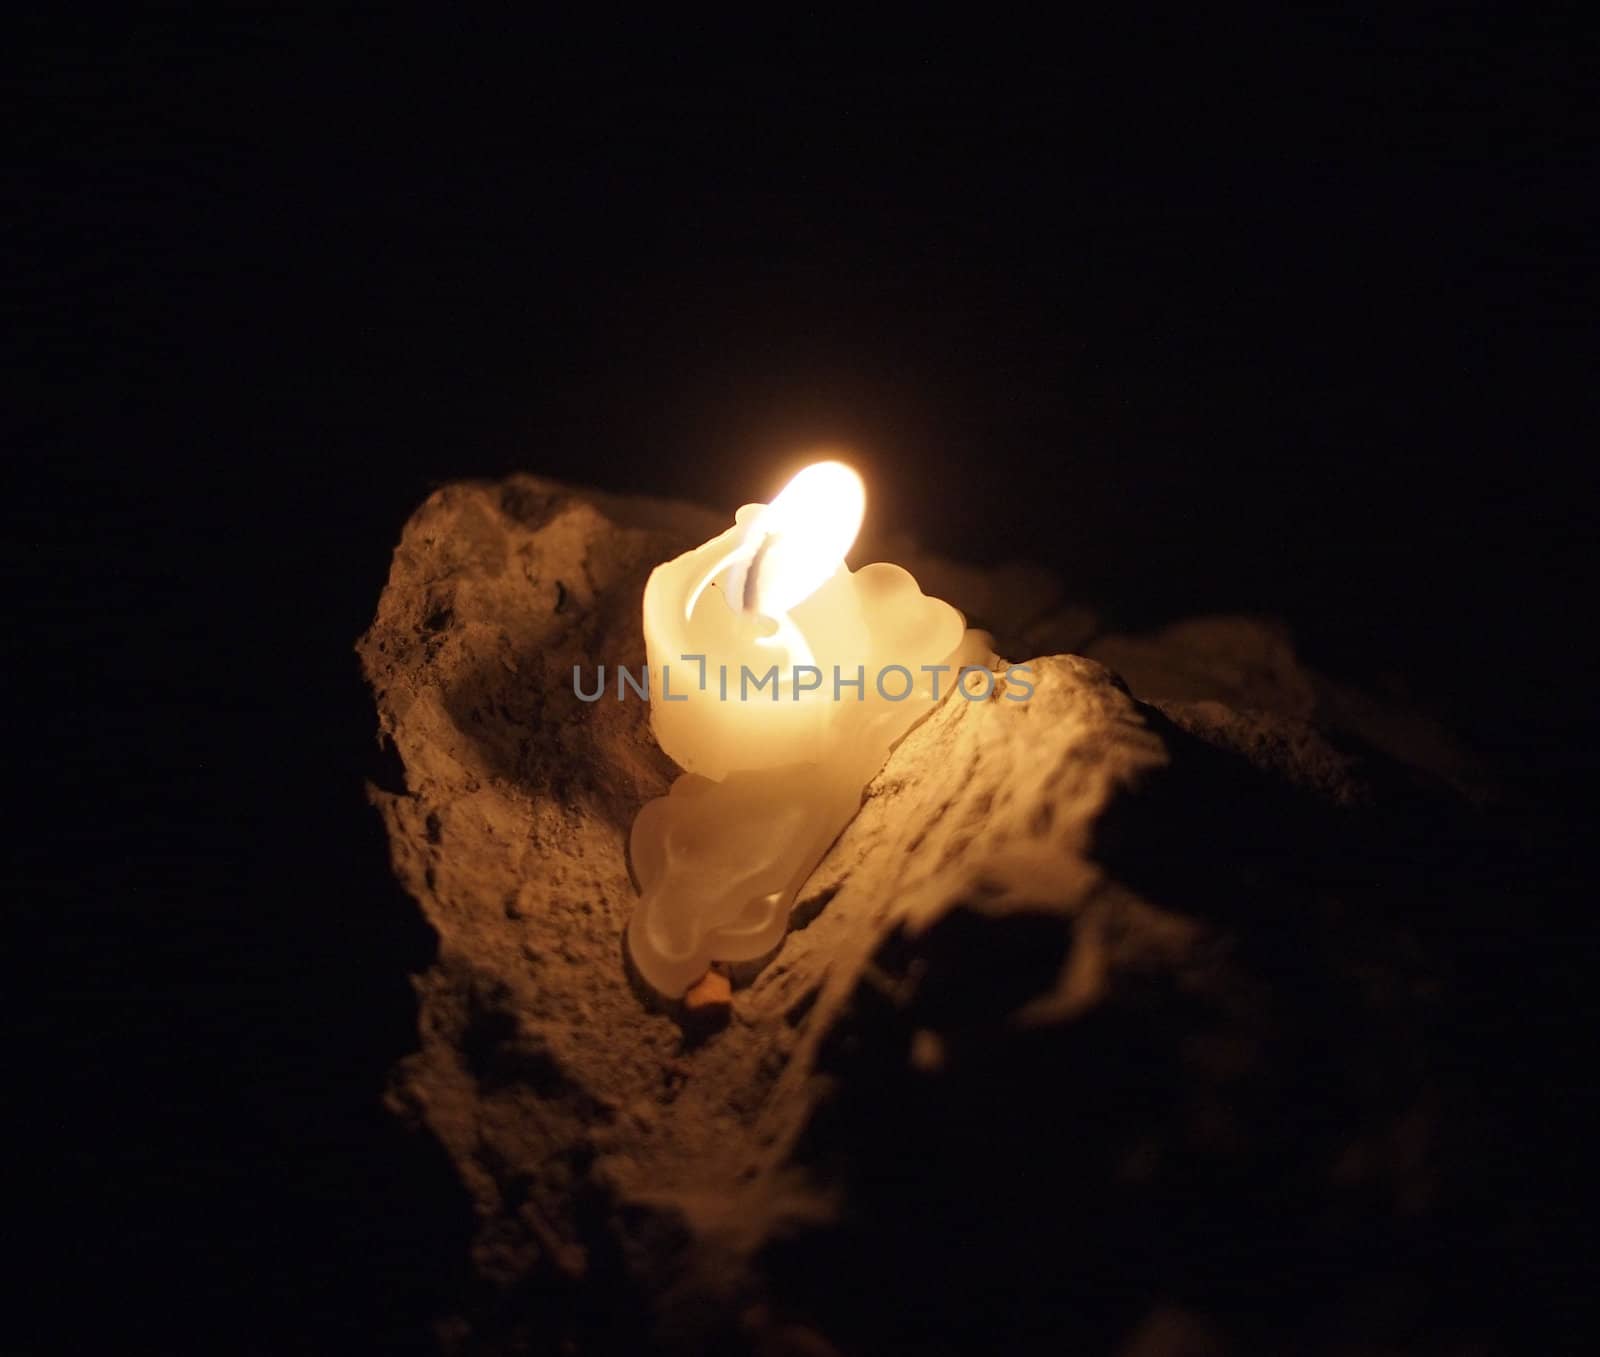 candle on the stone 